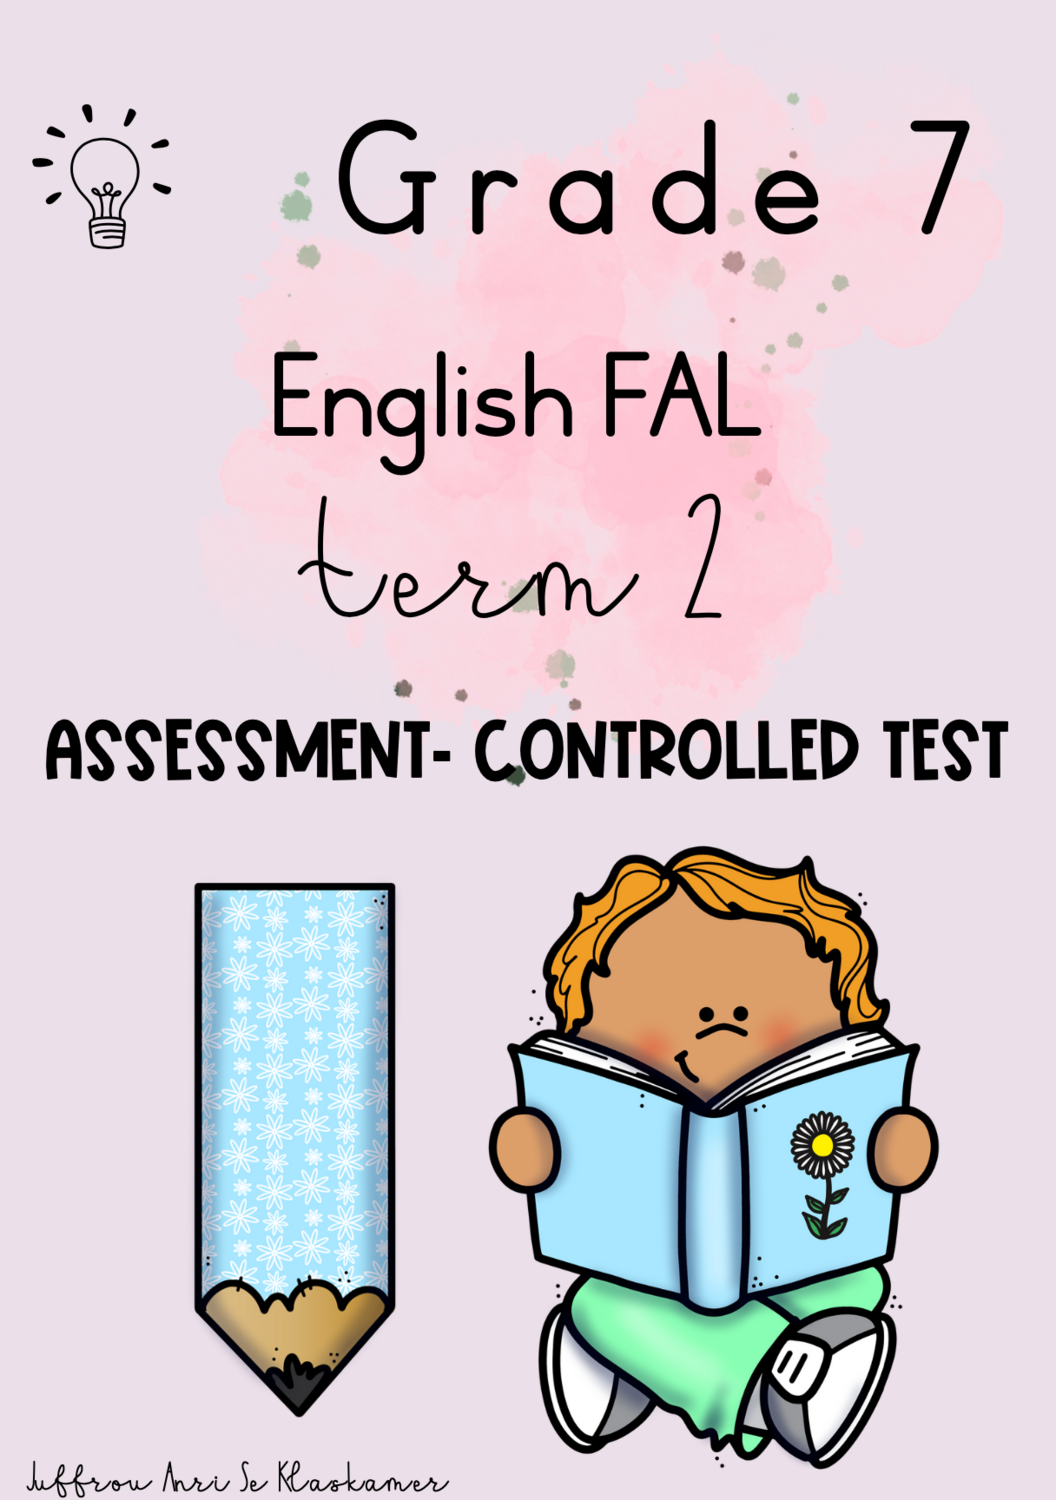 Grade 7 English FAL term 2 assessment- controlled test